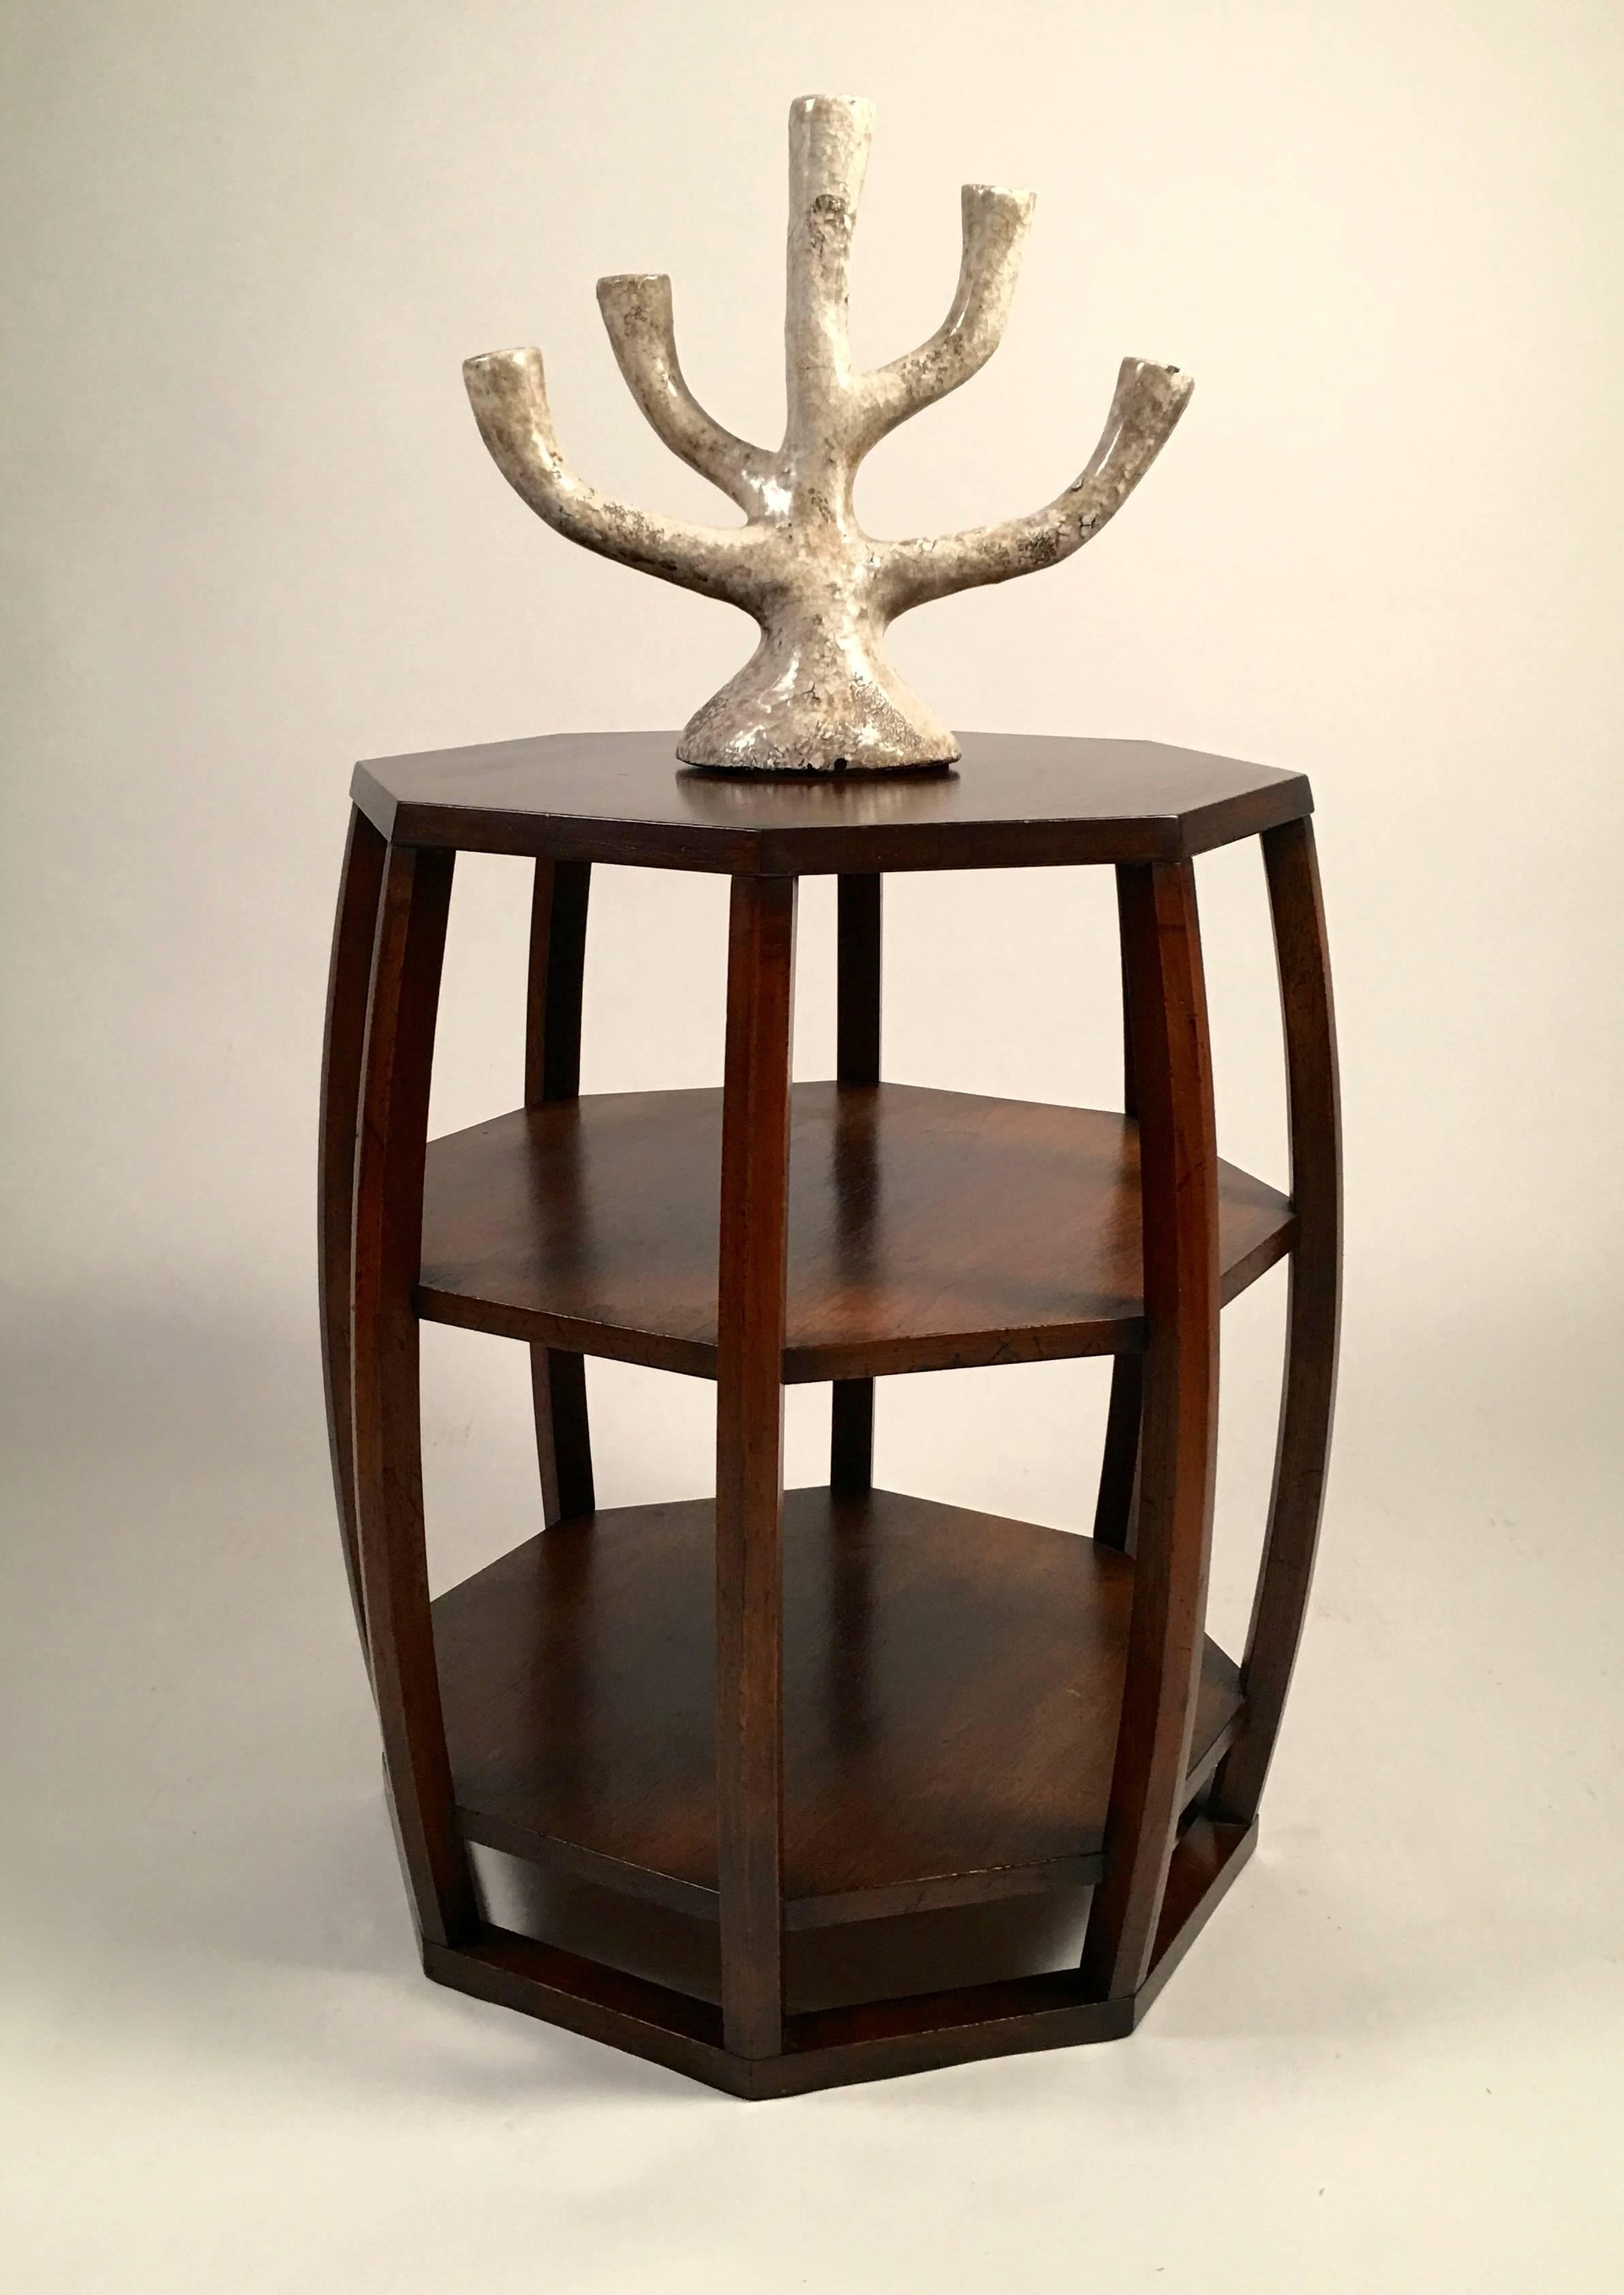 Mid-20th Century Asian Inspired Mid-Century Modern Occasional Table by Widdicomb